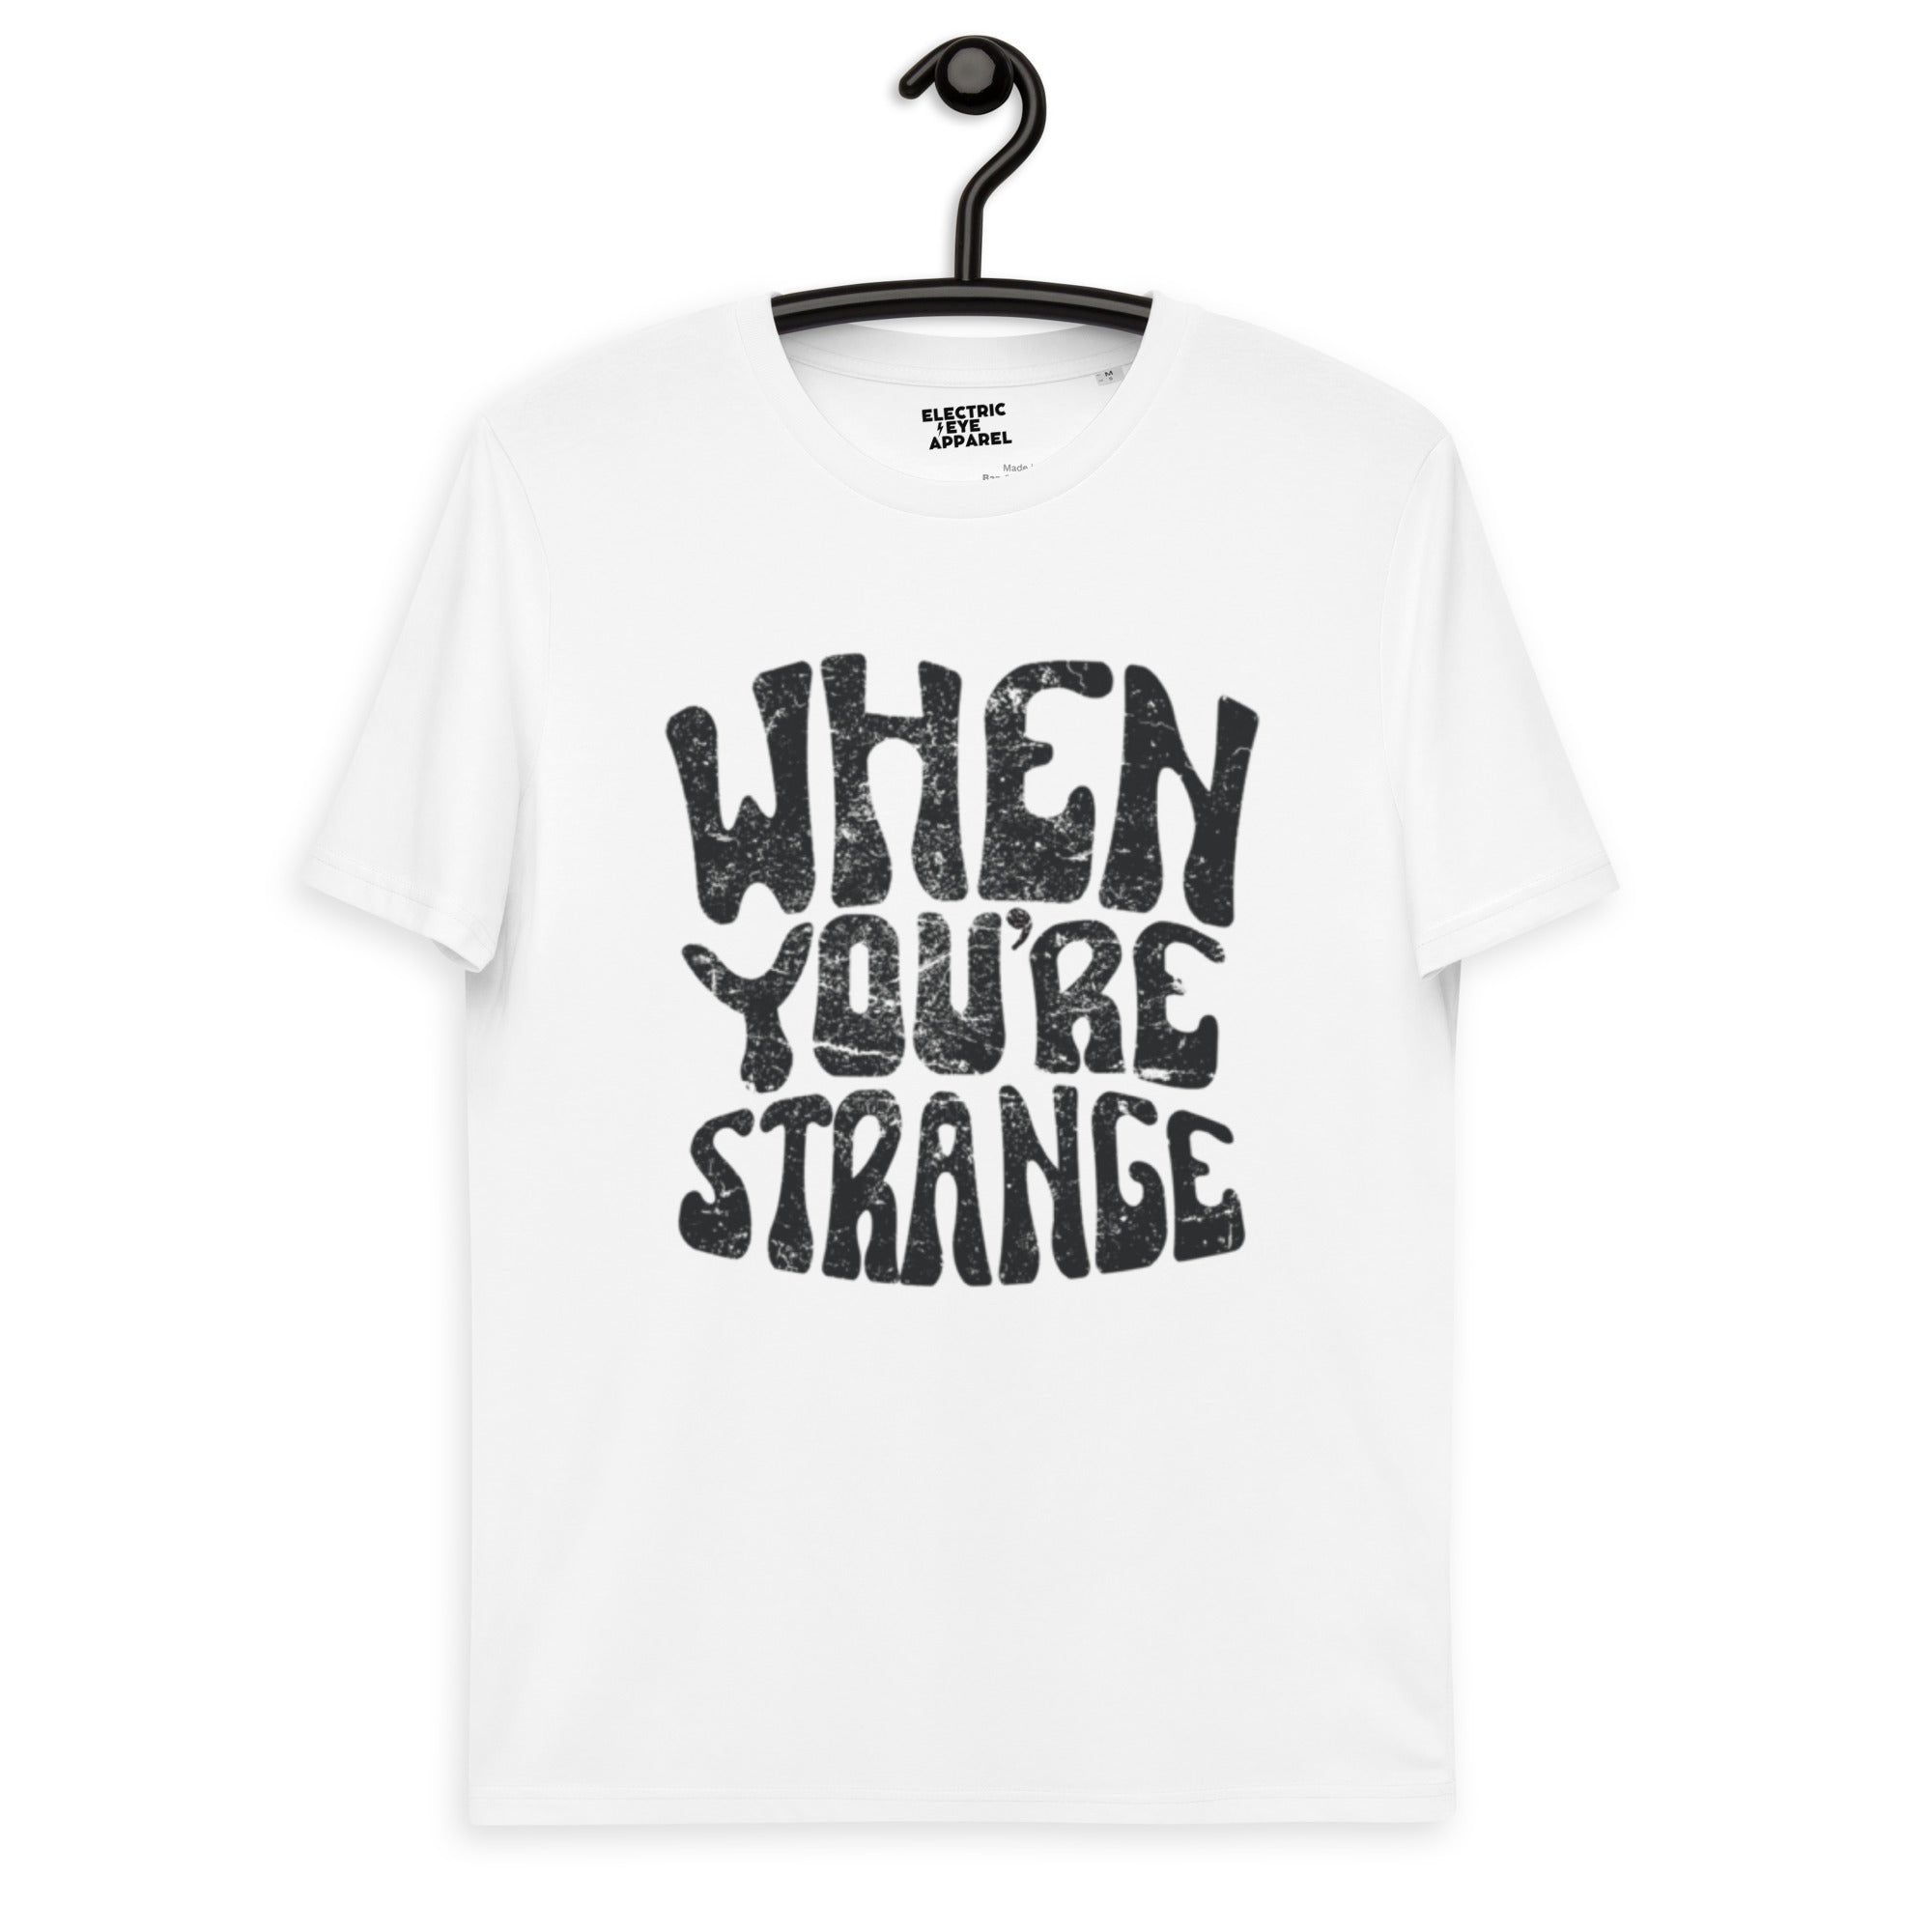 When Your Strange 60s Style Typography Printed Unisex organic cotton t-shirt - Inspired by The Doors / Jim Morrison